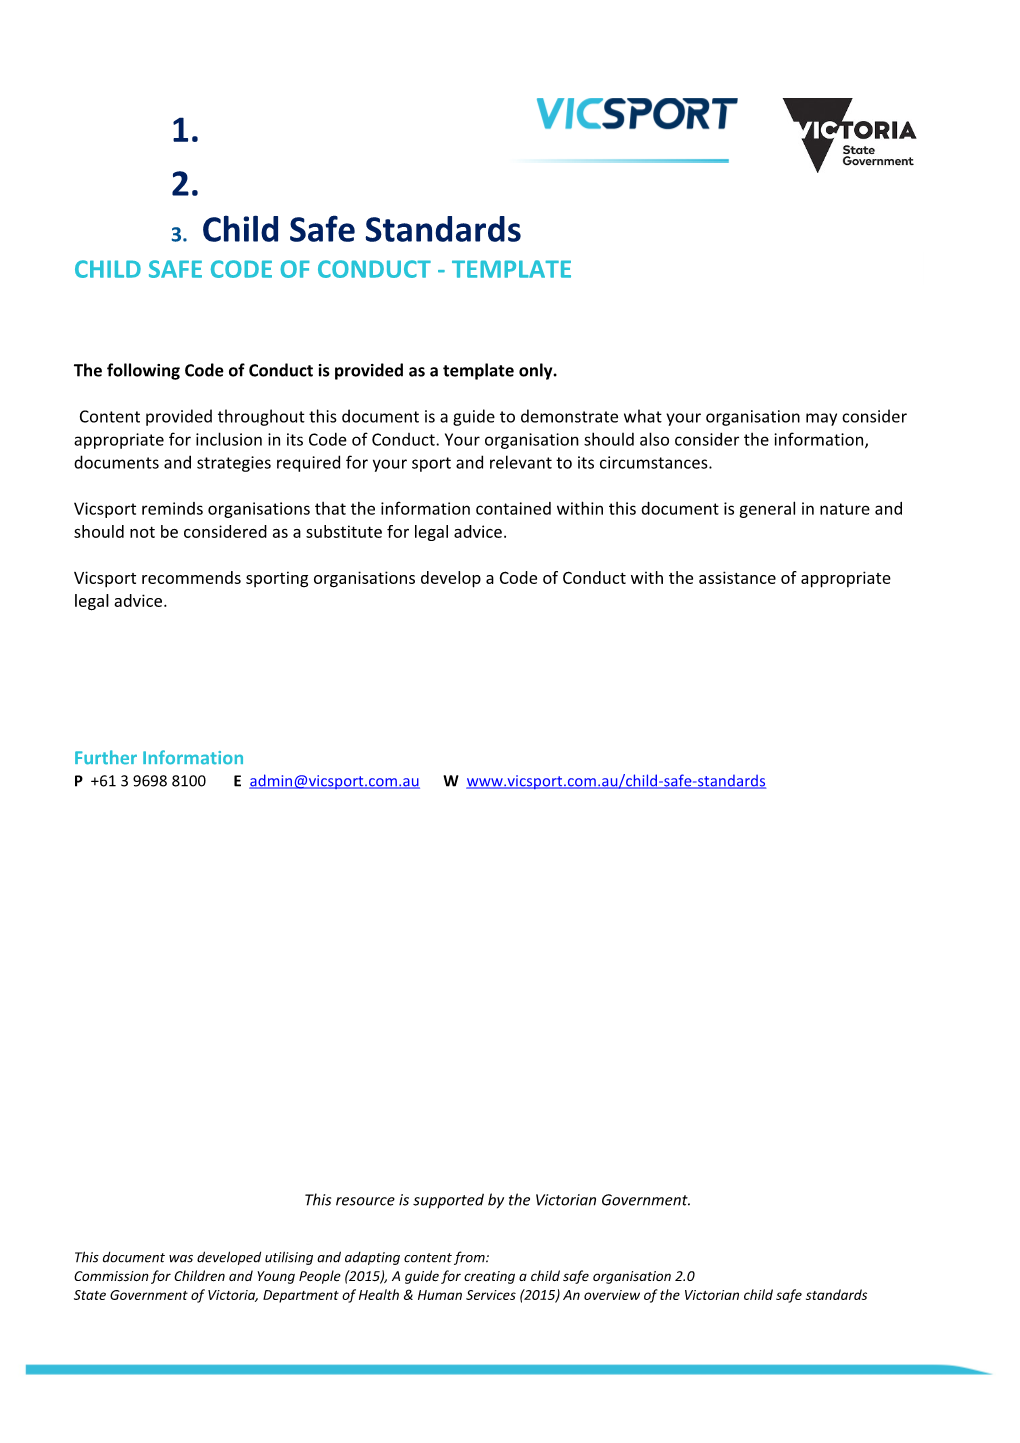 Child Safe Code of Conduct - Template